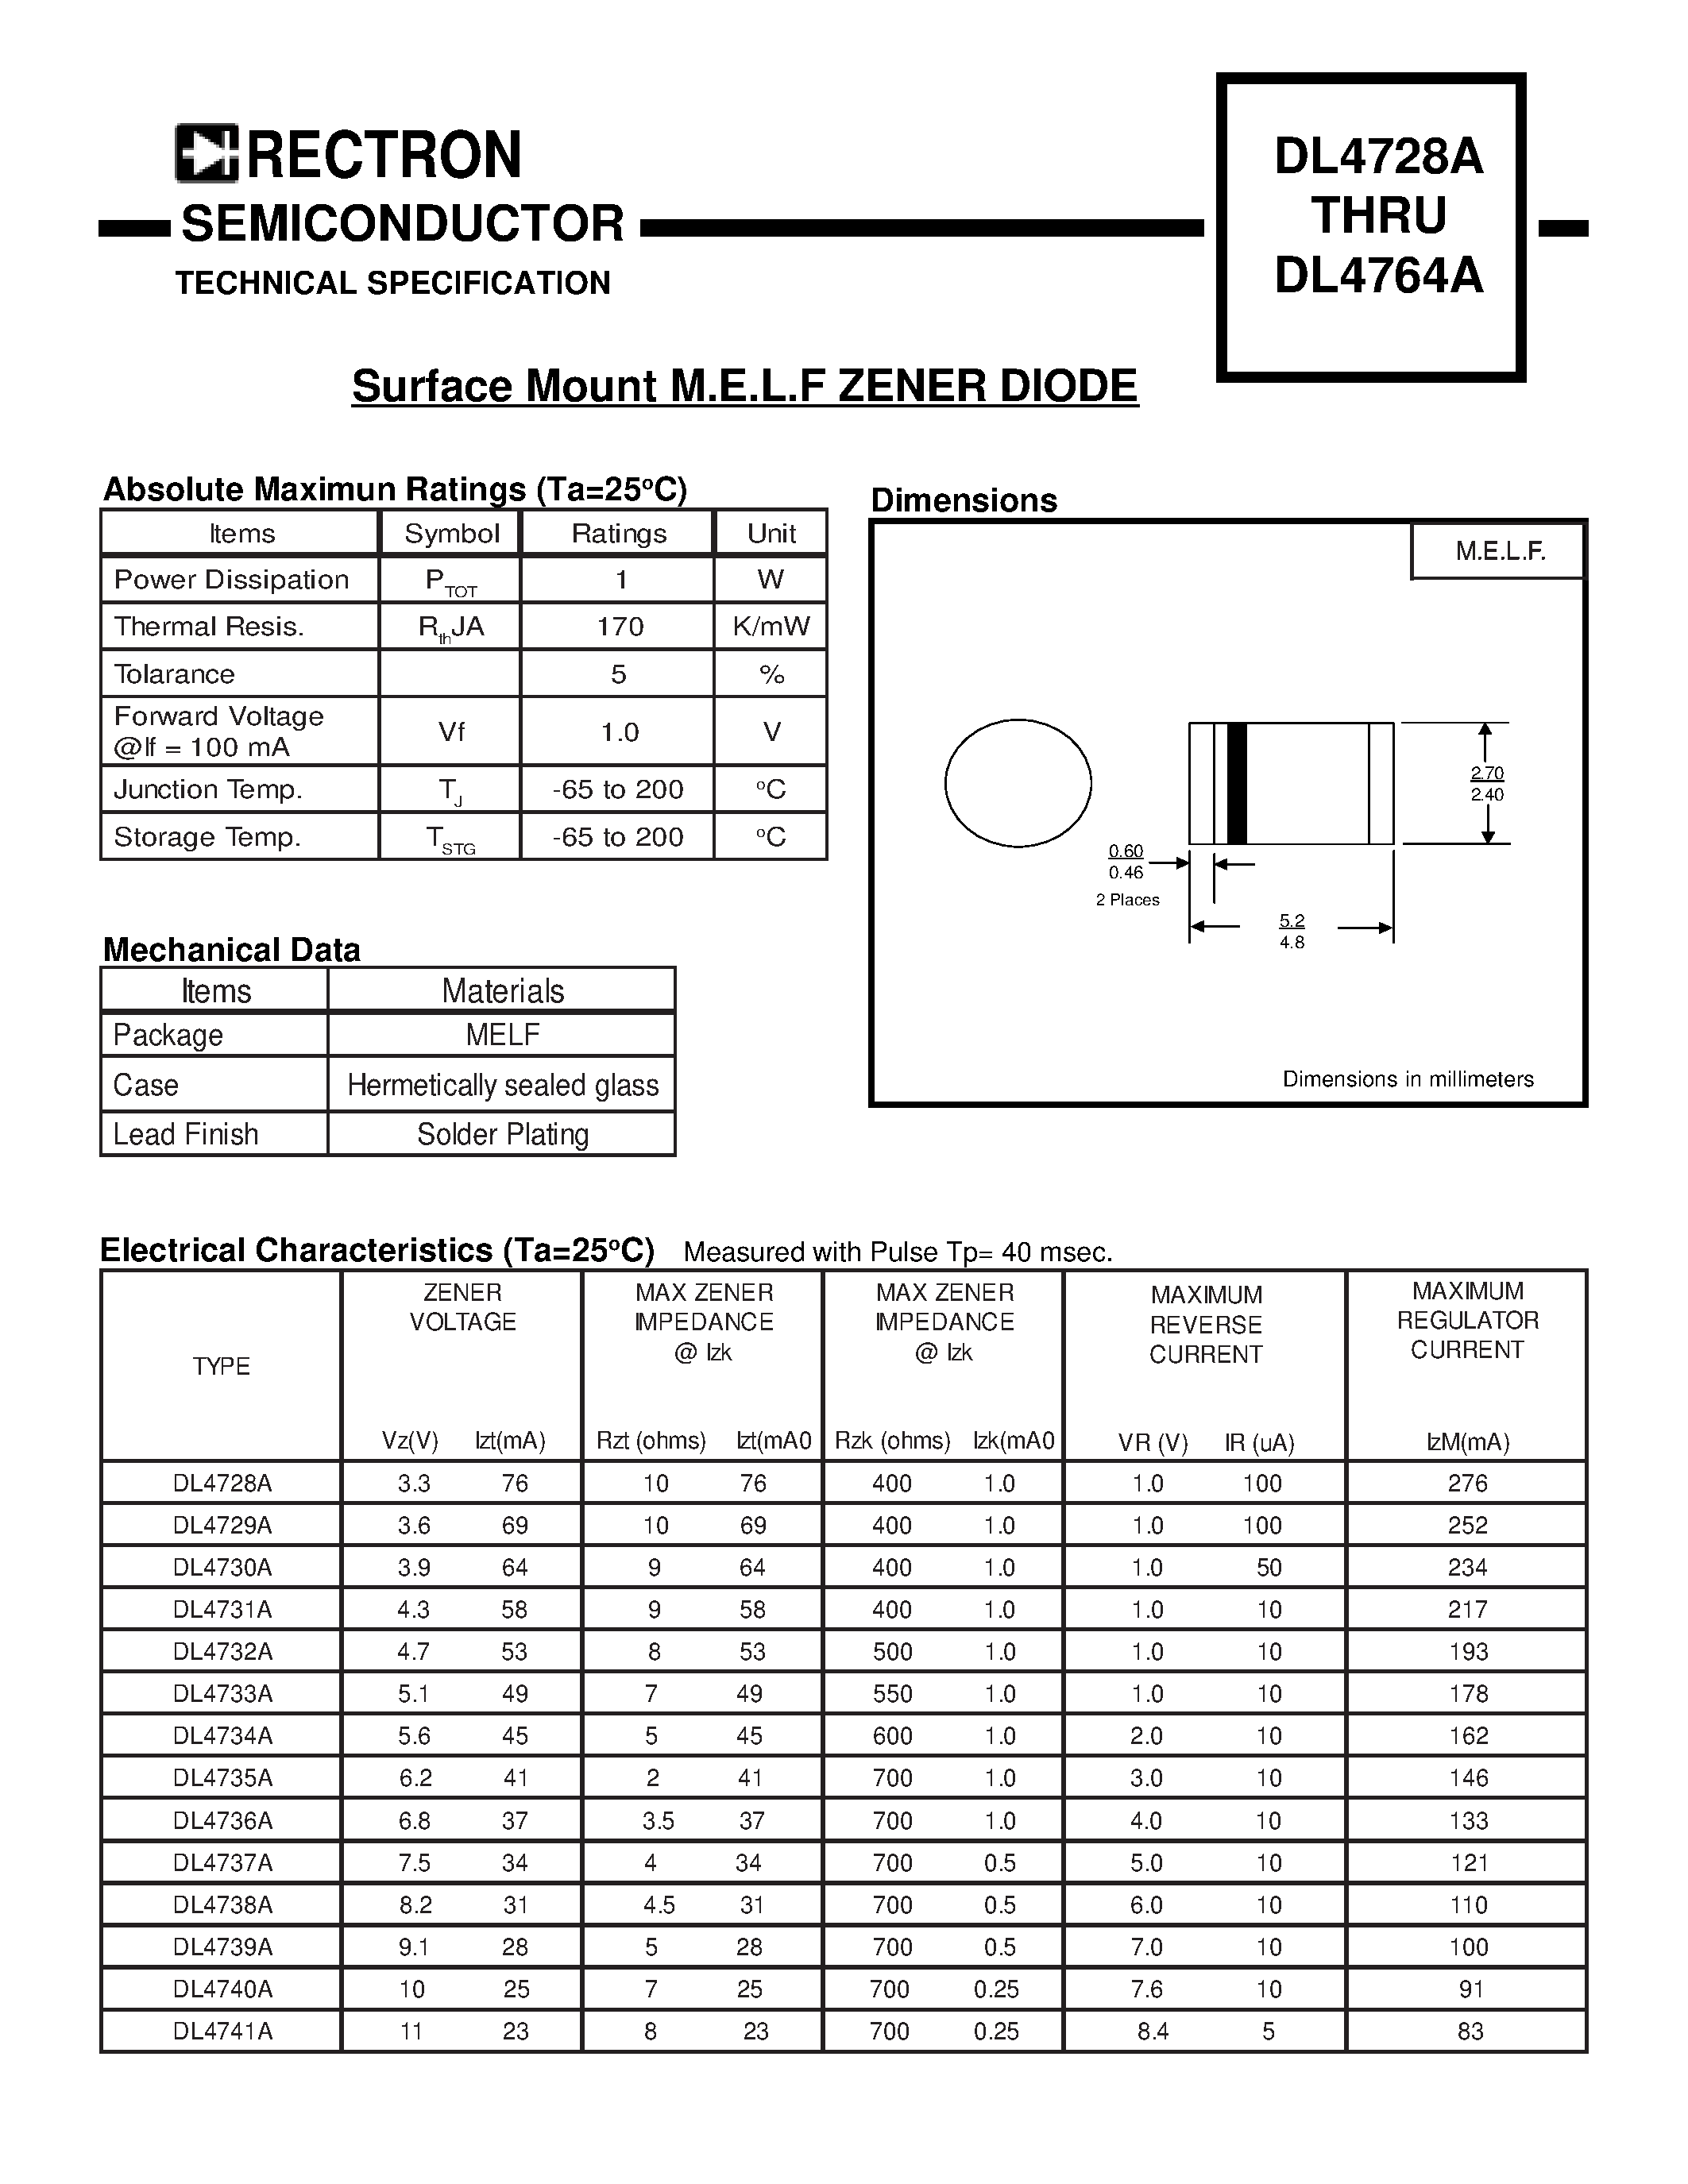 Datasheet DL4738A - Surface Mount M.E.L.F ZENER DIODE page 1